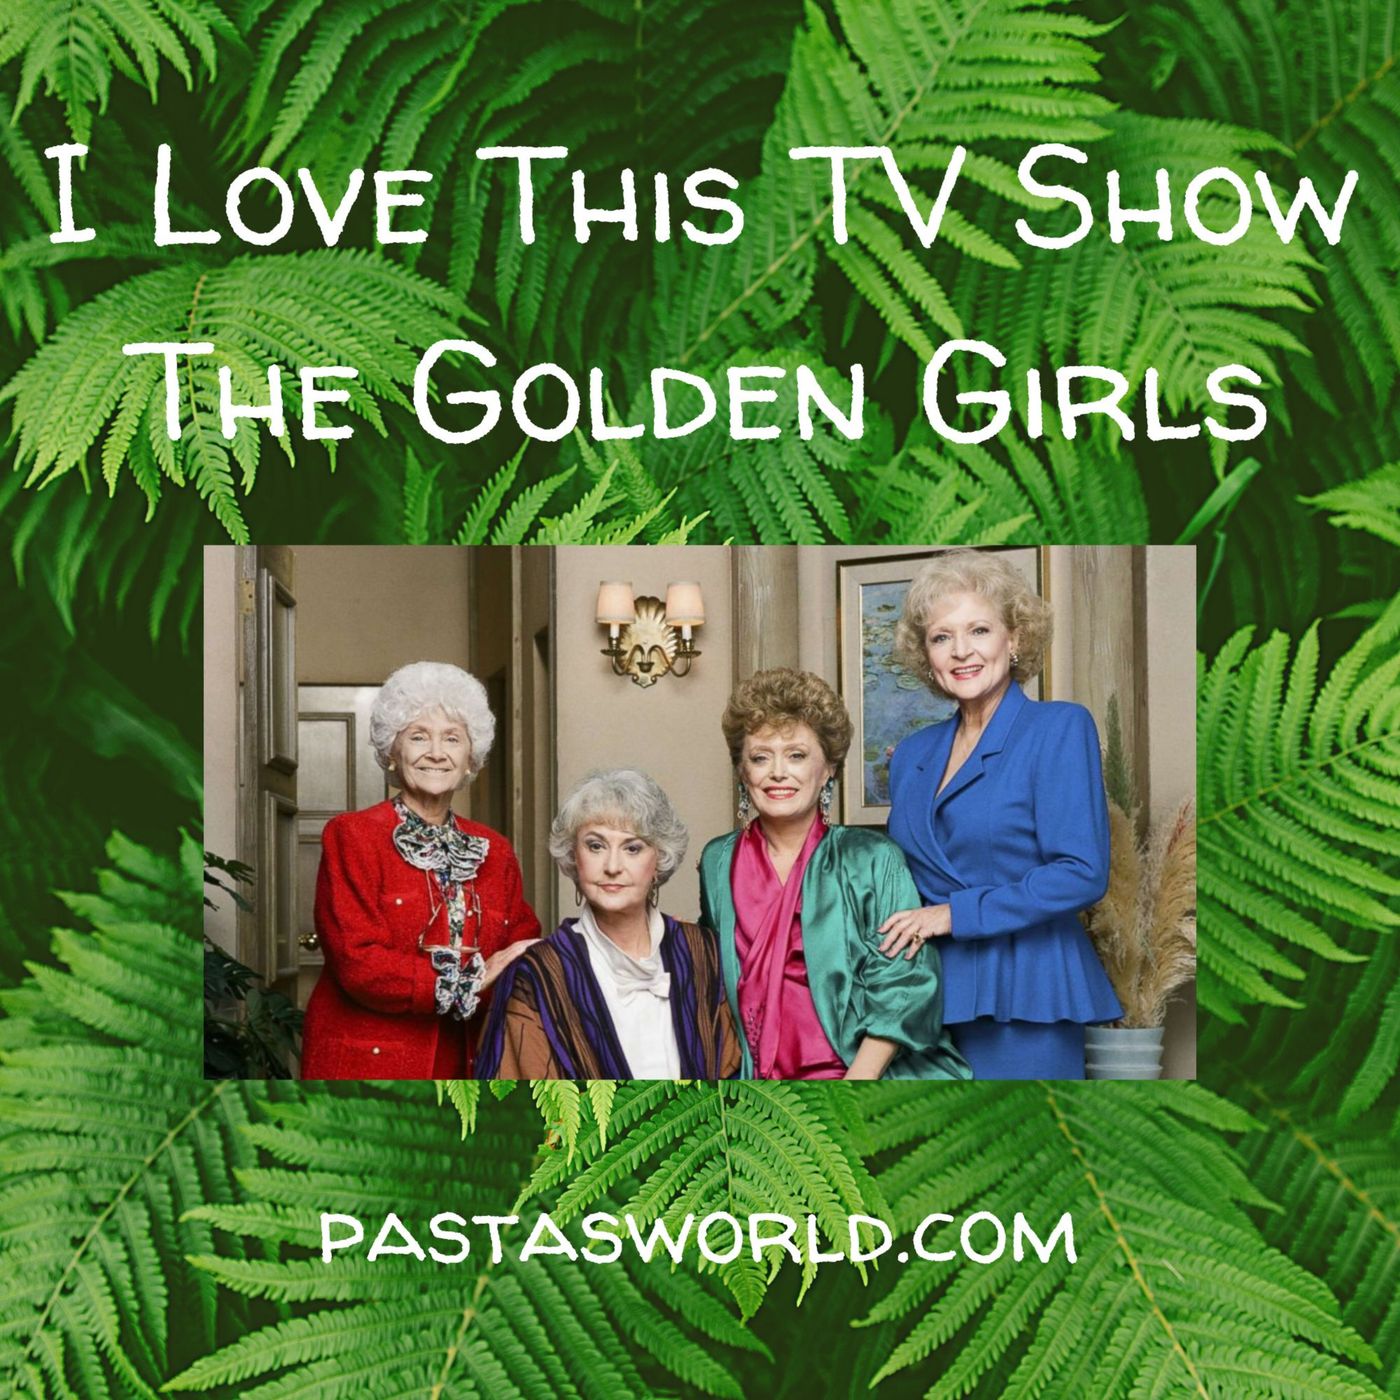 I Love This TV Show: The Golden Girls